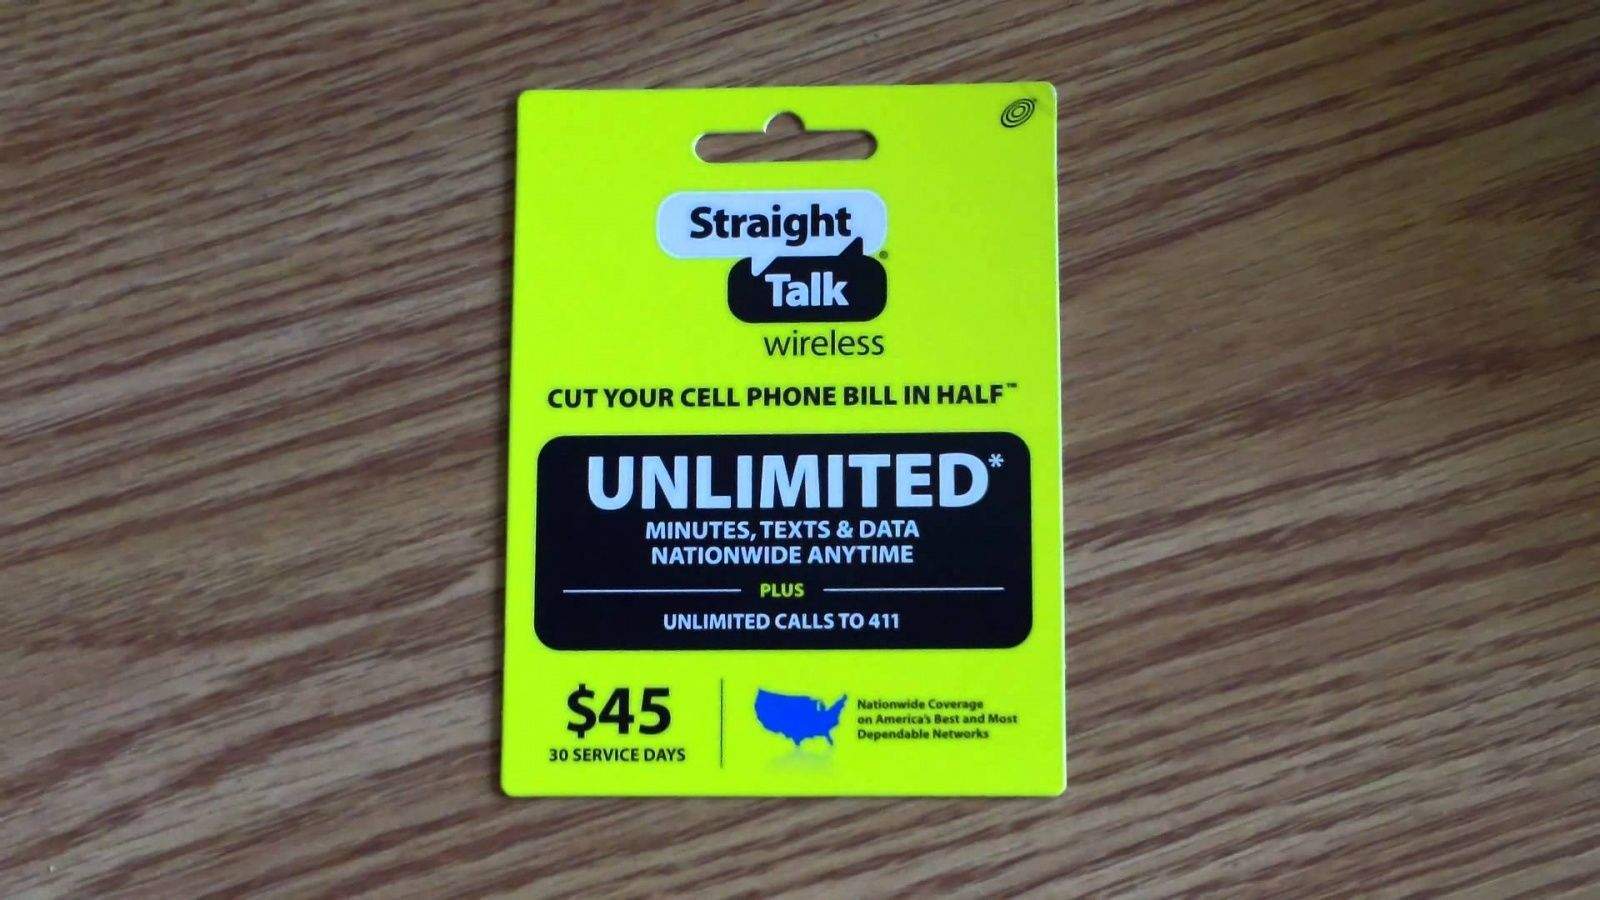 This sort of promotion is what got TracFone in trouble. Photo: StraightTalk